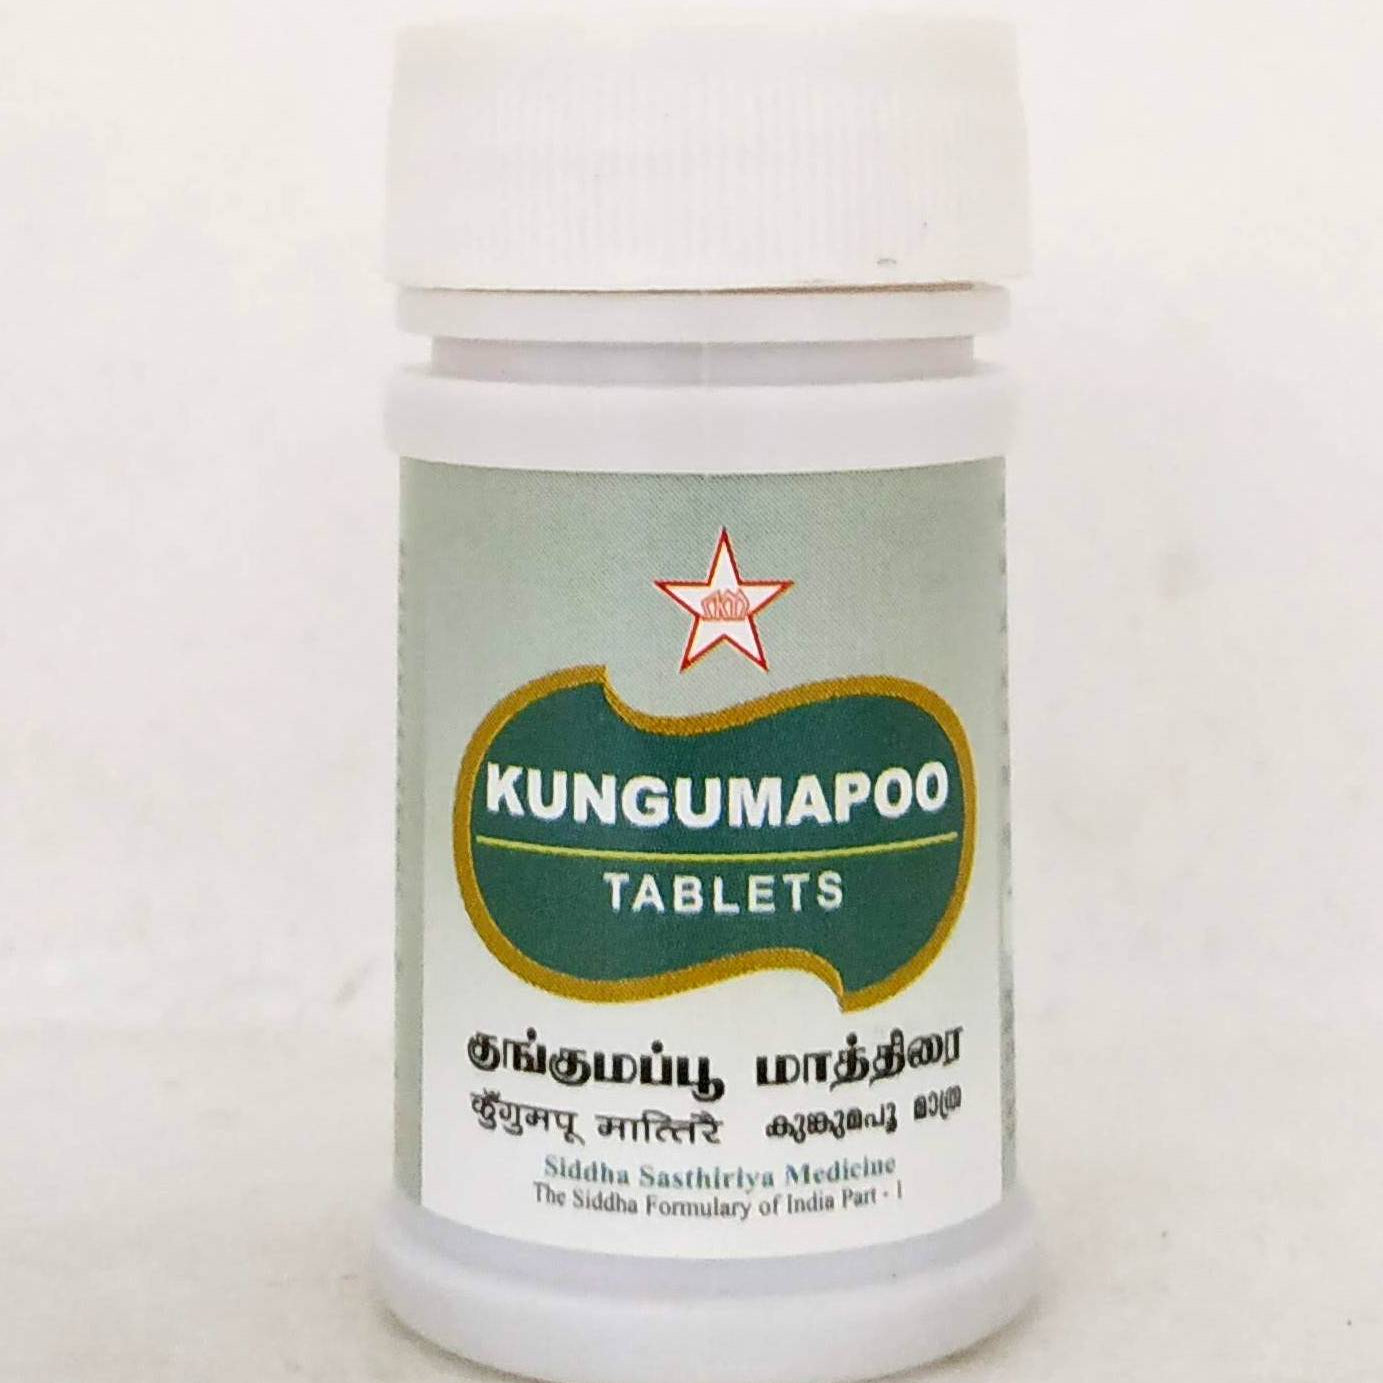 Shop Kungumapoo Tablets - 50Tablets at price 138.00 from SKM Online - Ayush Care